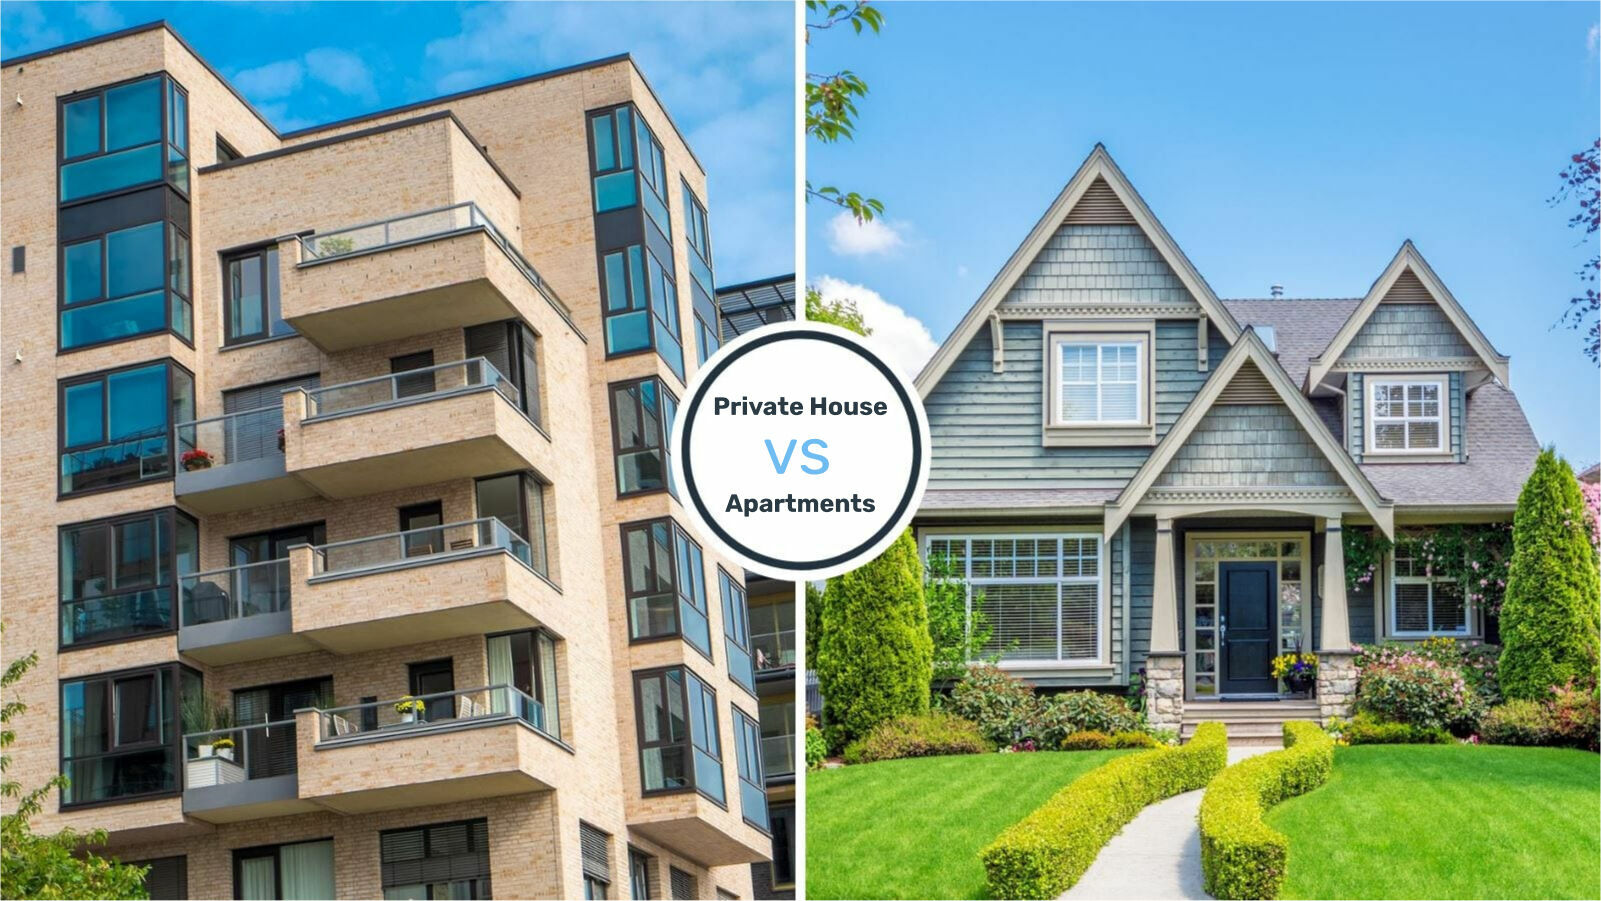 Private House vs. Apartments